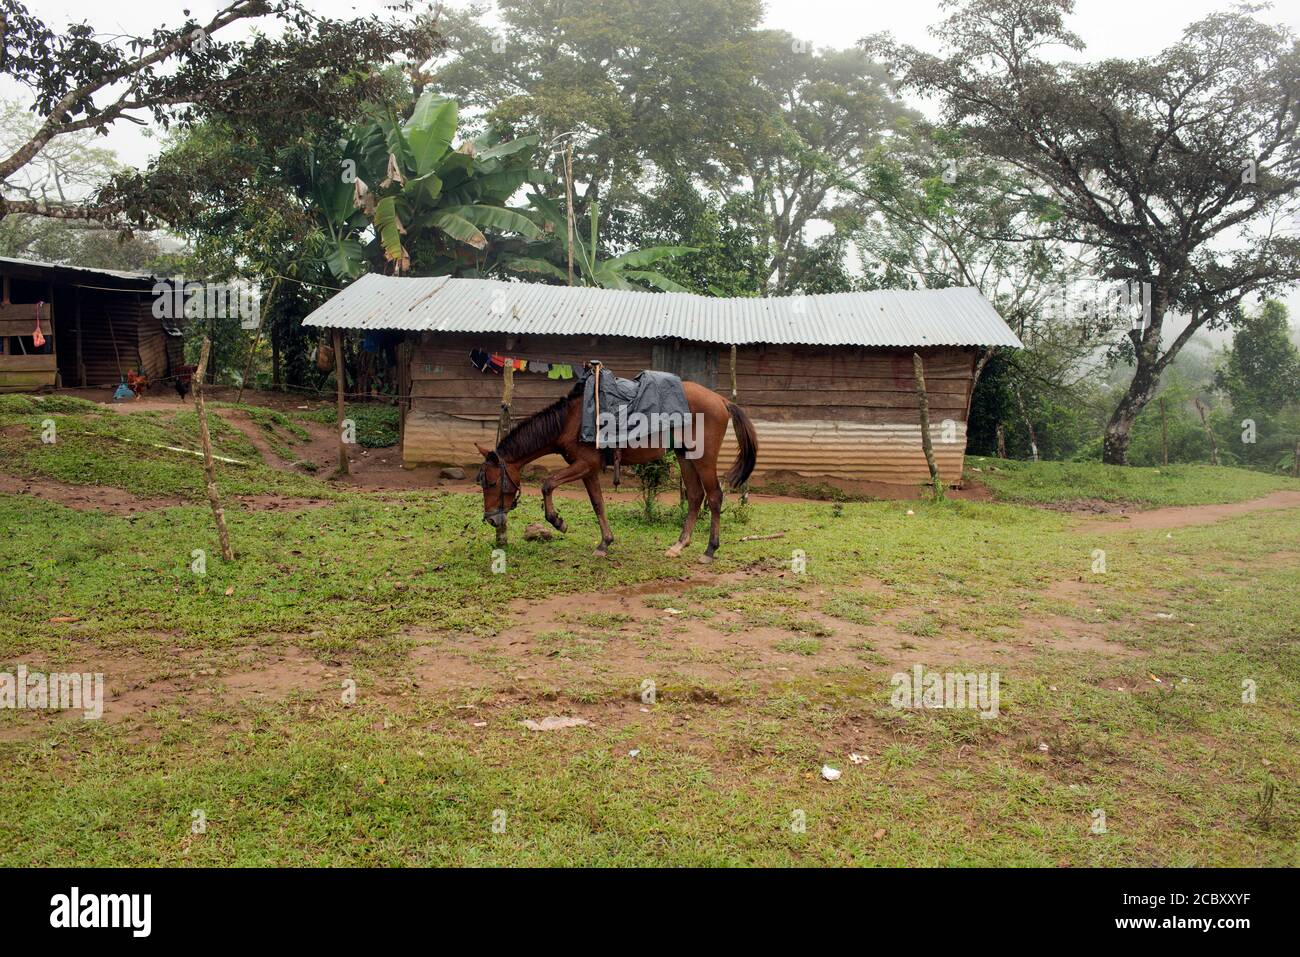 A horse outside a house in Panama's indigenous Ngäbe-Bugle comarca (reservation). Stock Photo